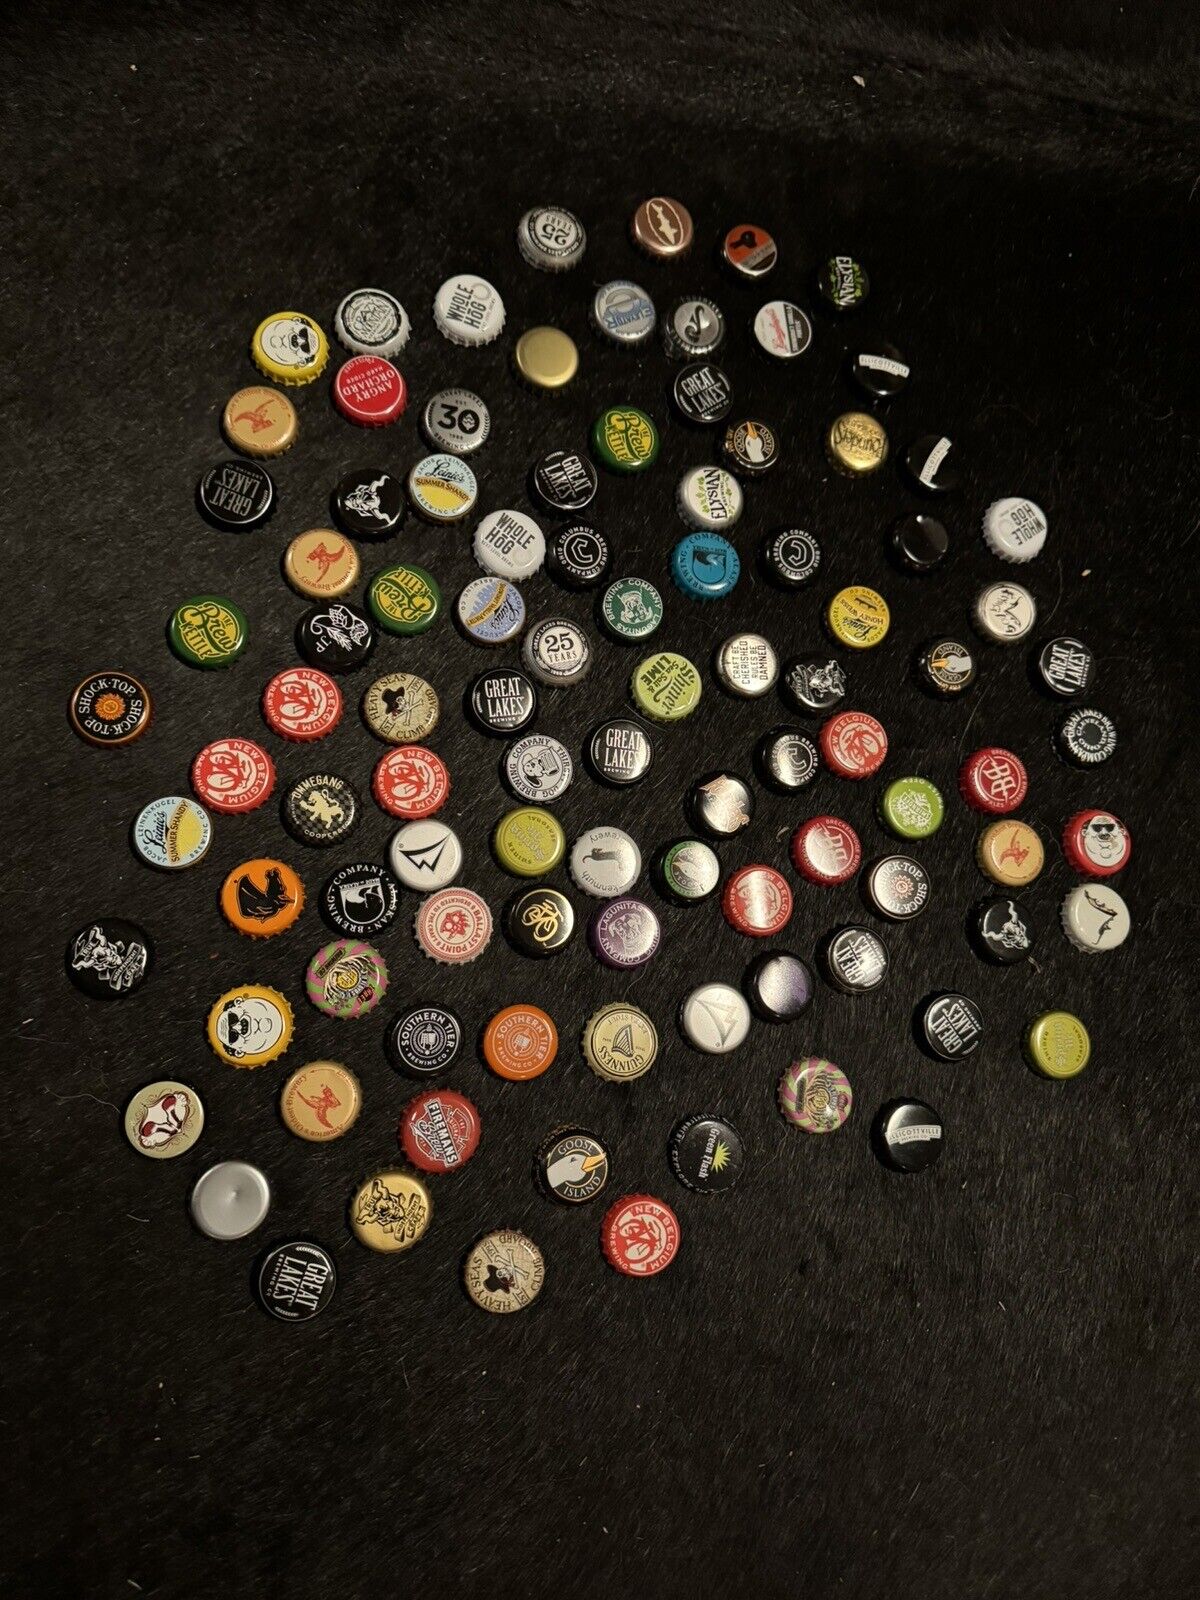 100 Beer Bottle Caps Mixed Lot Recycle Upcycle Craft Projects Collecting